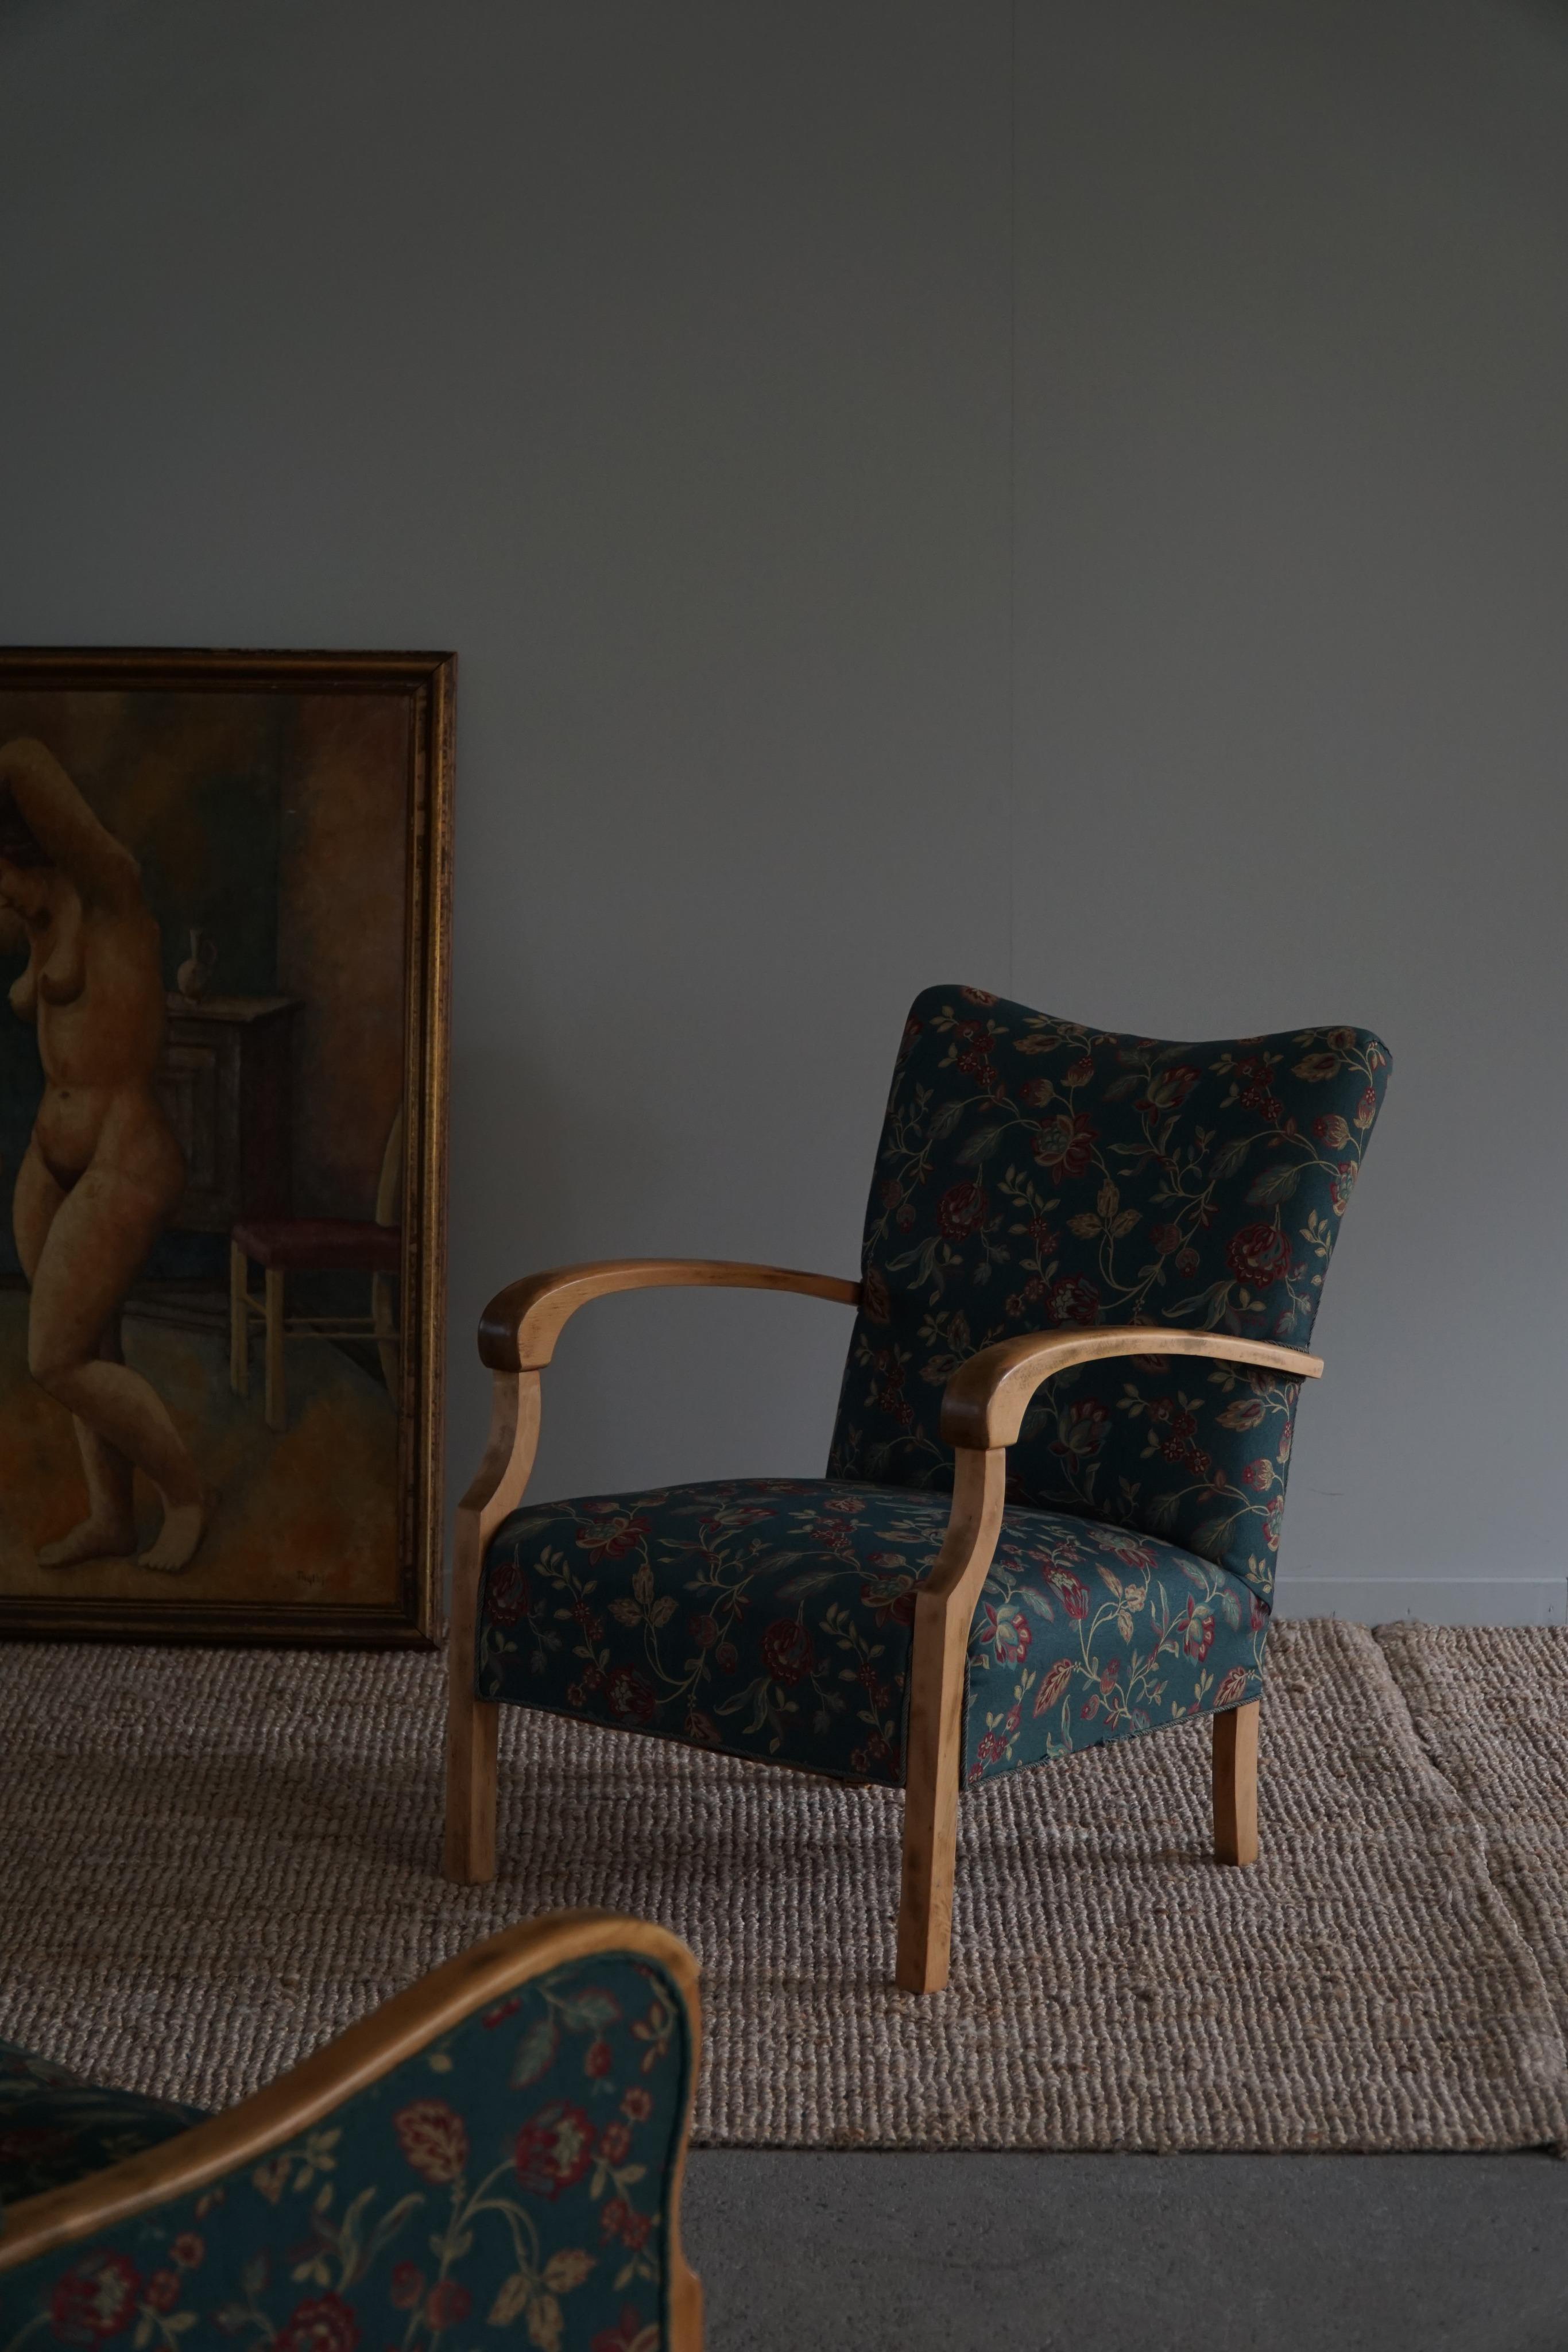 A timeless pair of Danish modern lounge chairs in beech and the original colorful flower fabric. Crafted by a Danish cabinetmaker in the 1960s.

These fine lounge chairs embodies the essence of Danish design, combining sleek lines, organic forms,